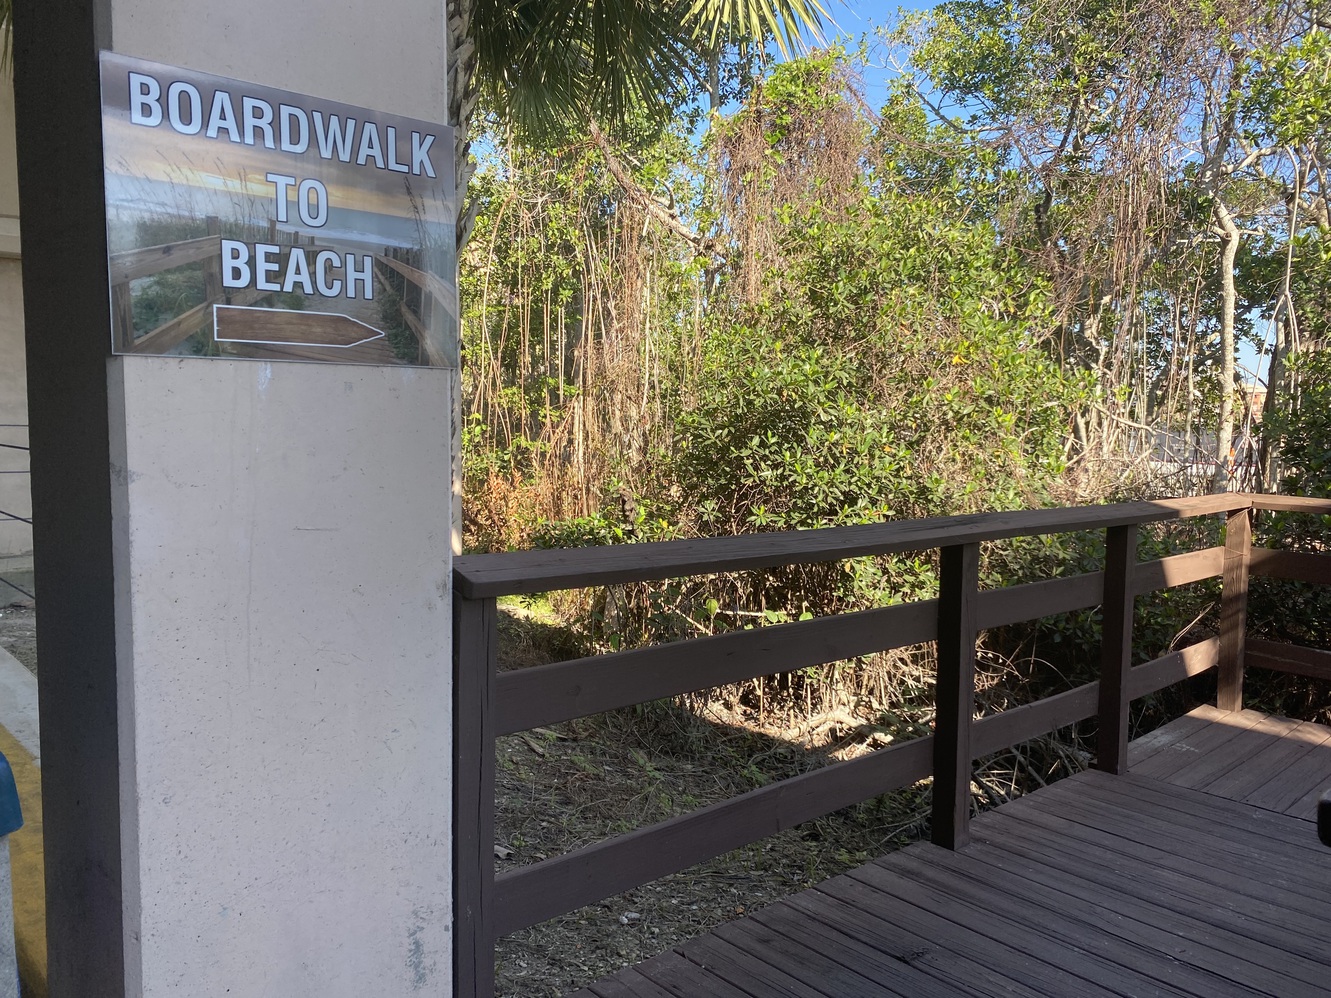 The garage has a
      boardwalk for pedestrians to get to the sidewalk, and then to the
      beach.